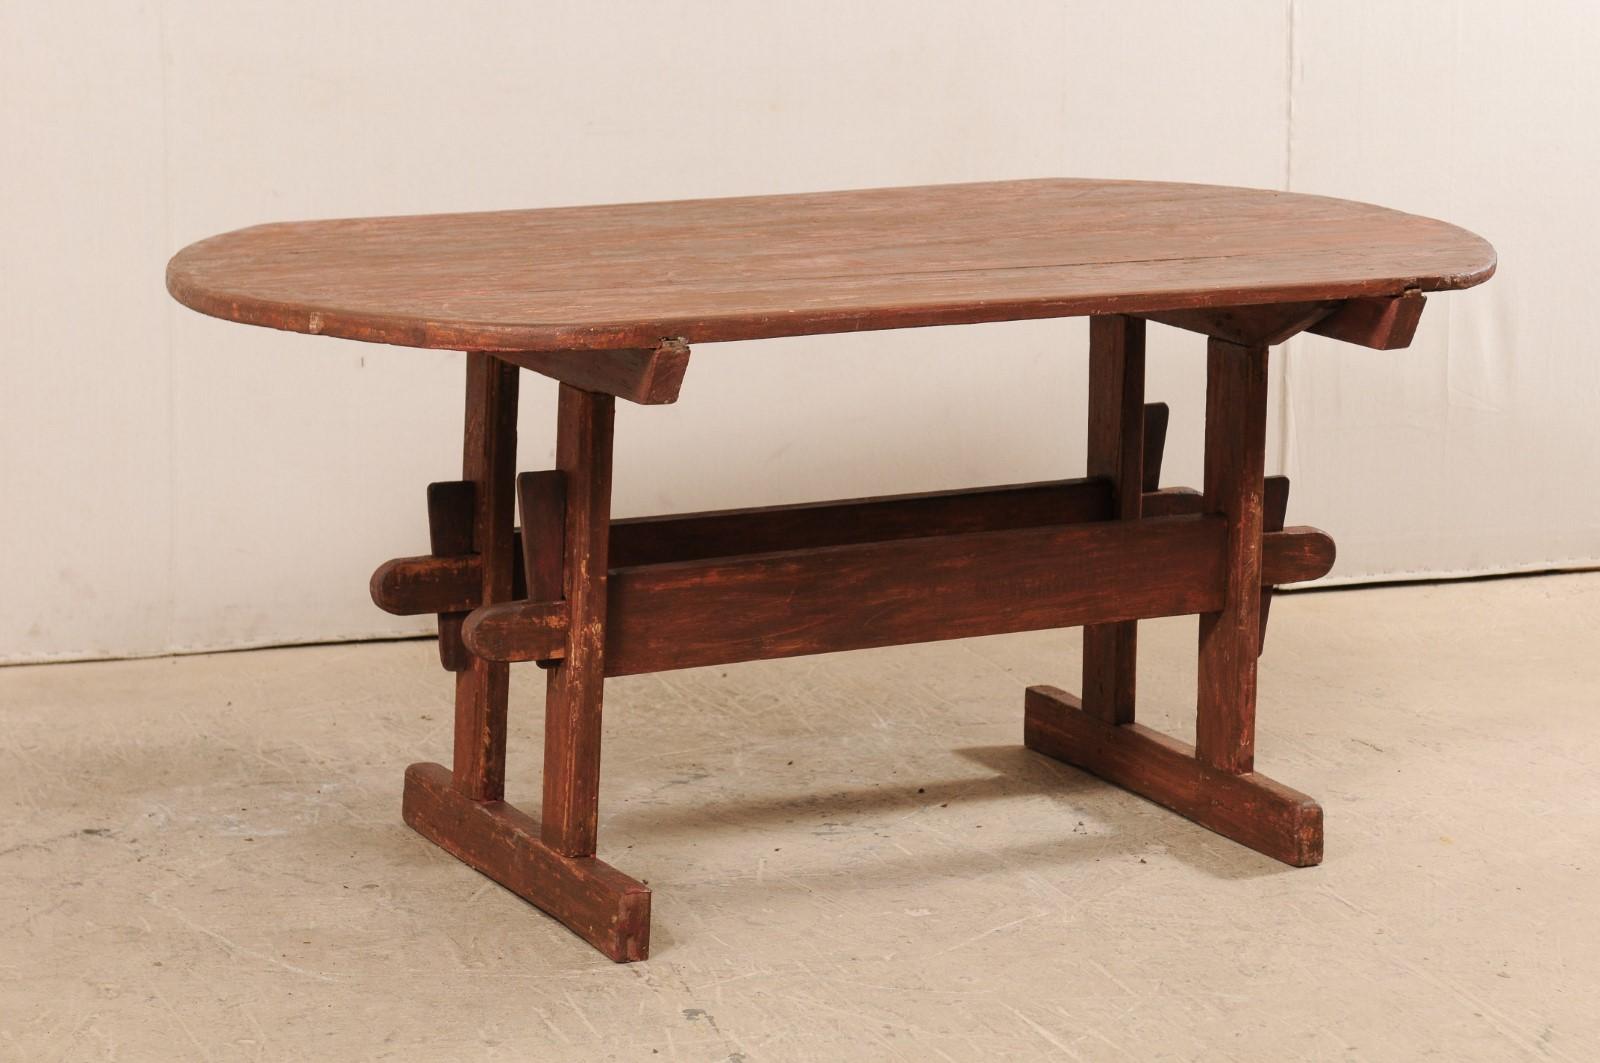 A Swedish falu painted trestle table from the early 19th century. This antique table from Sweden has an overall oval-shaped top (with straight edges at each longer side) which is supported by trestle end supports, and canted wood stretchers down